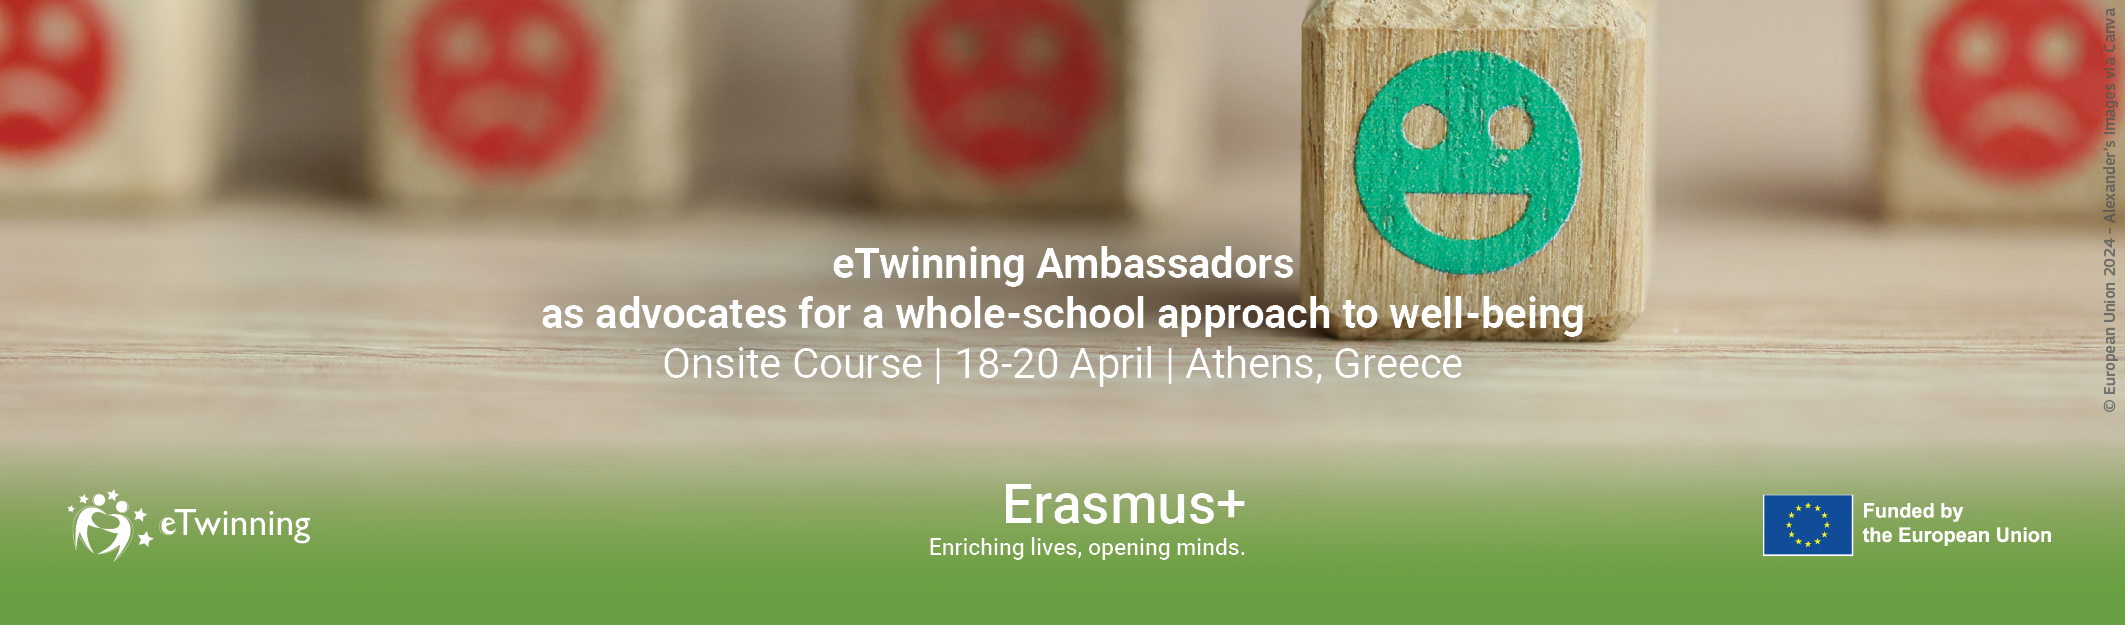 eTwinning Ambassadors as advocates for a whole-school approach to well-being